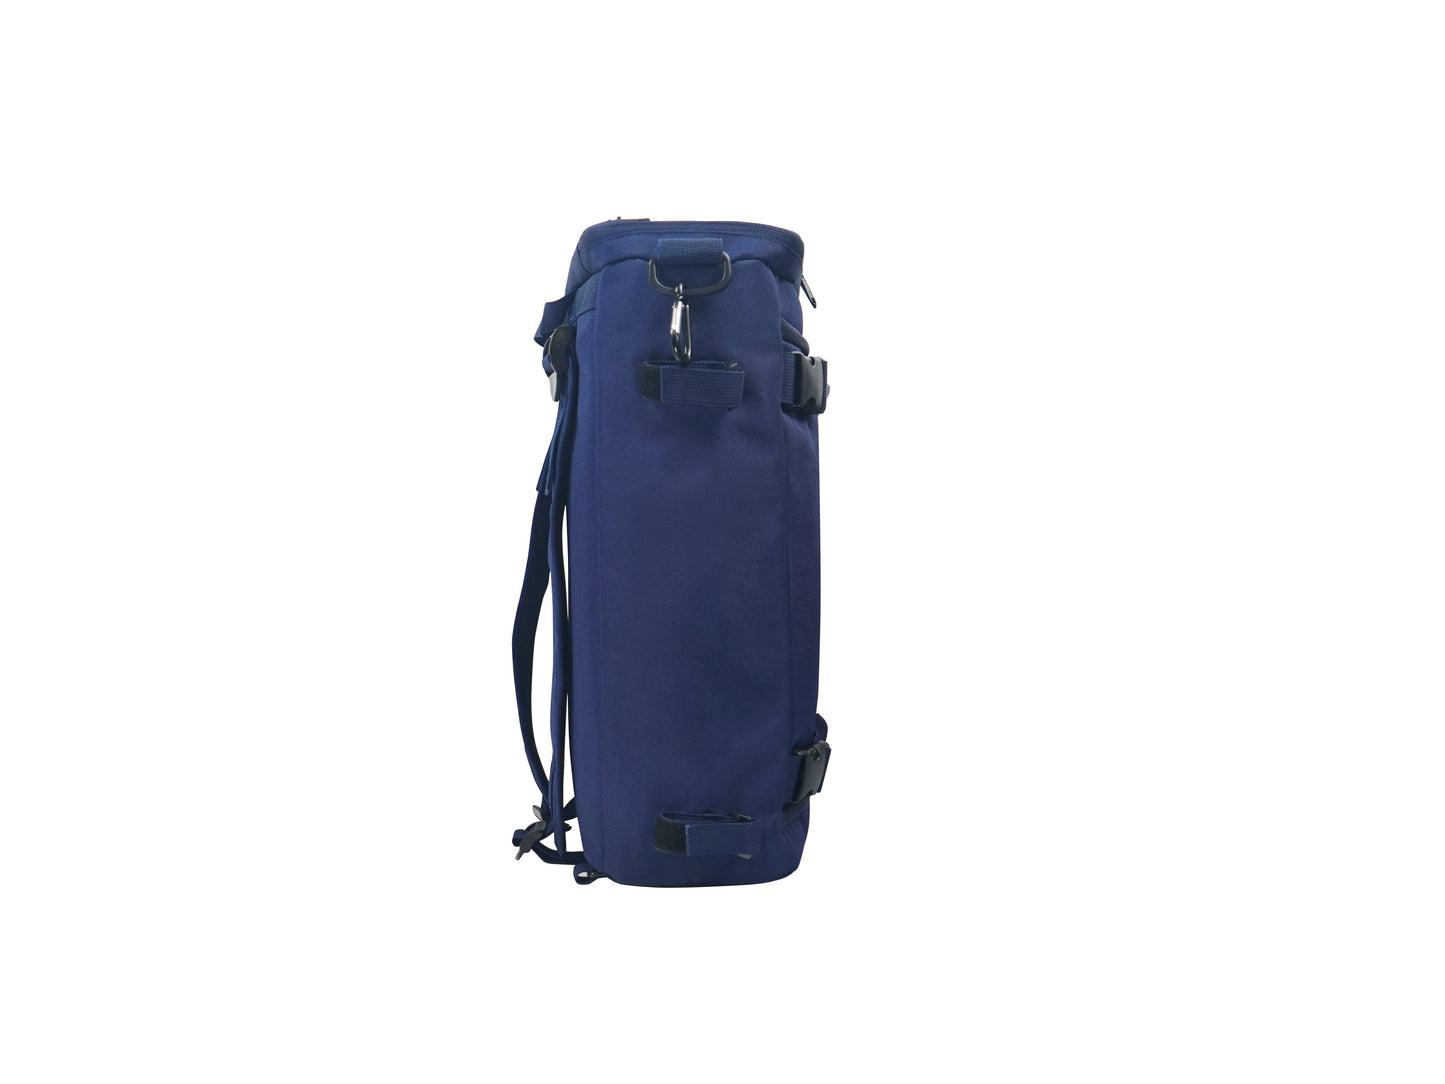 Scarborough College - Accra Backpack - Navy